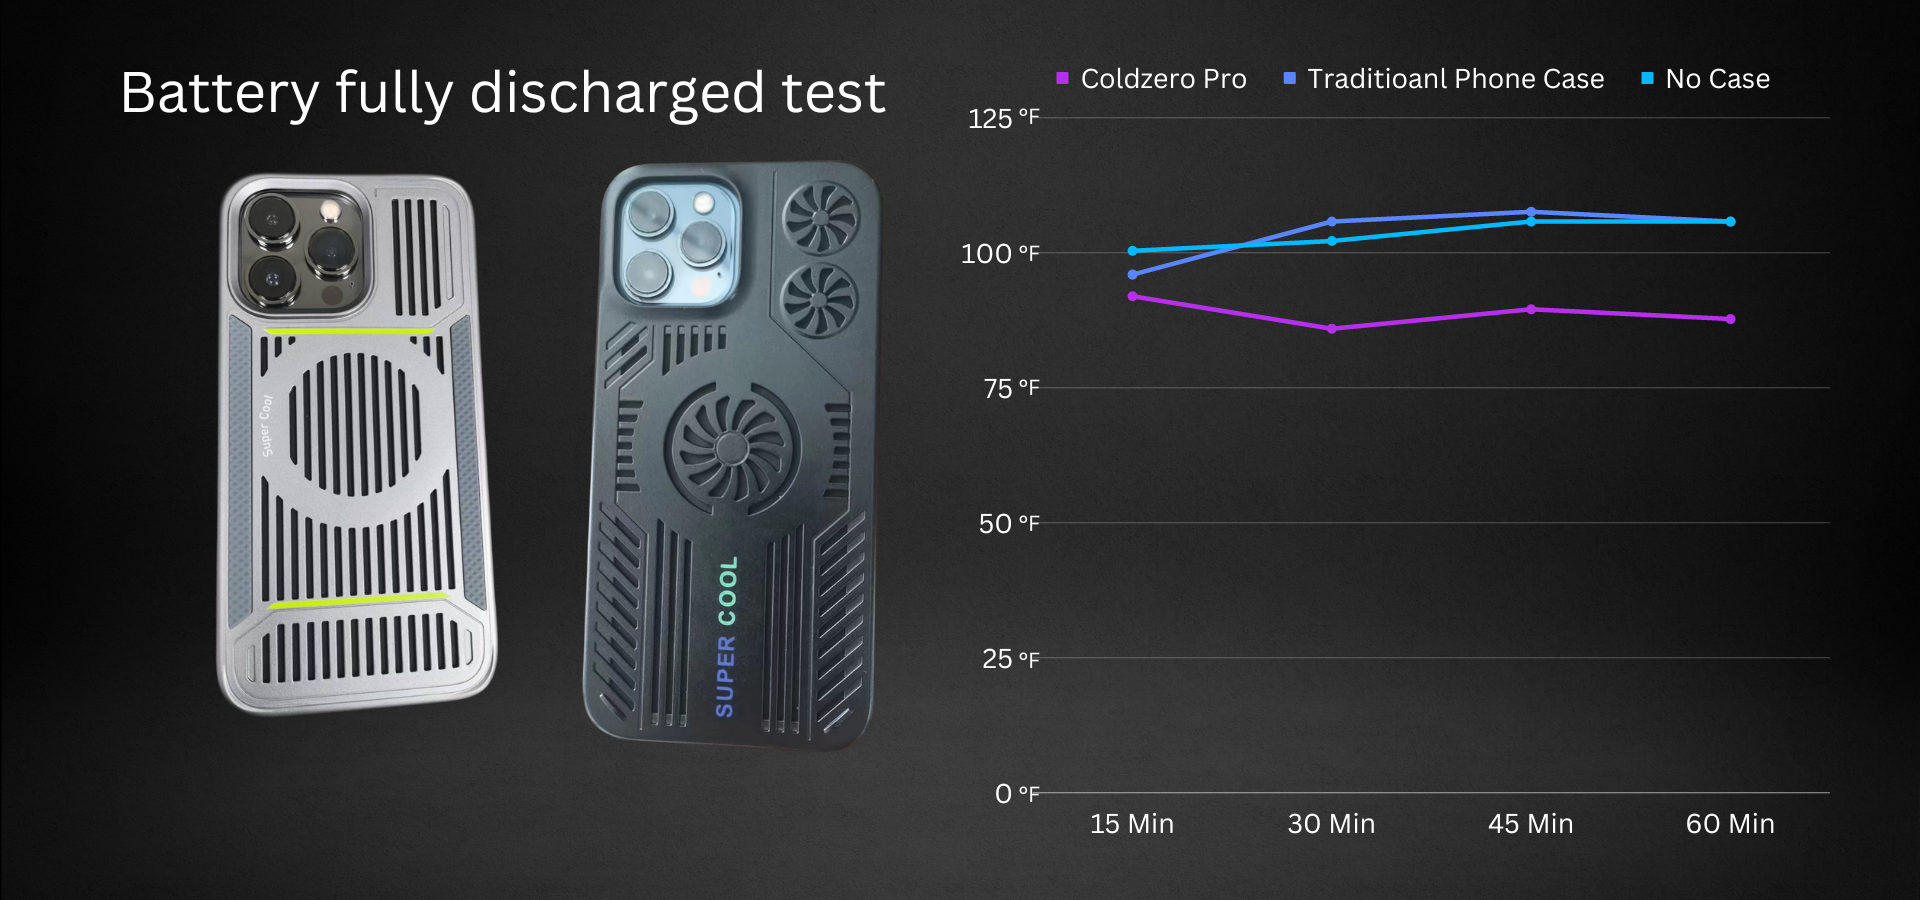 Battery Fully Discharged Test on Phone Cases